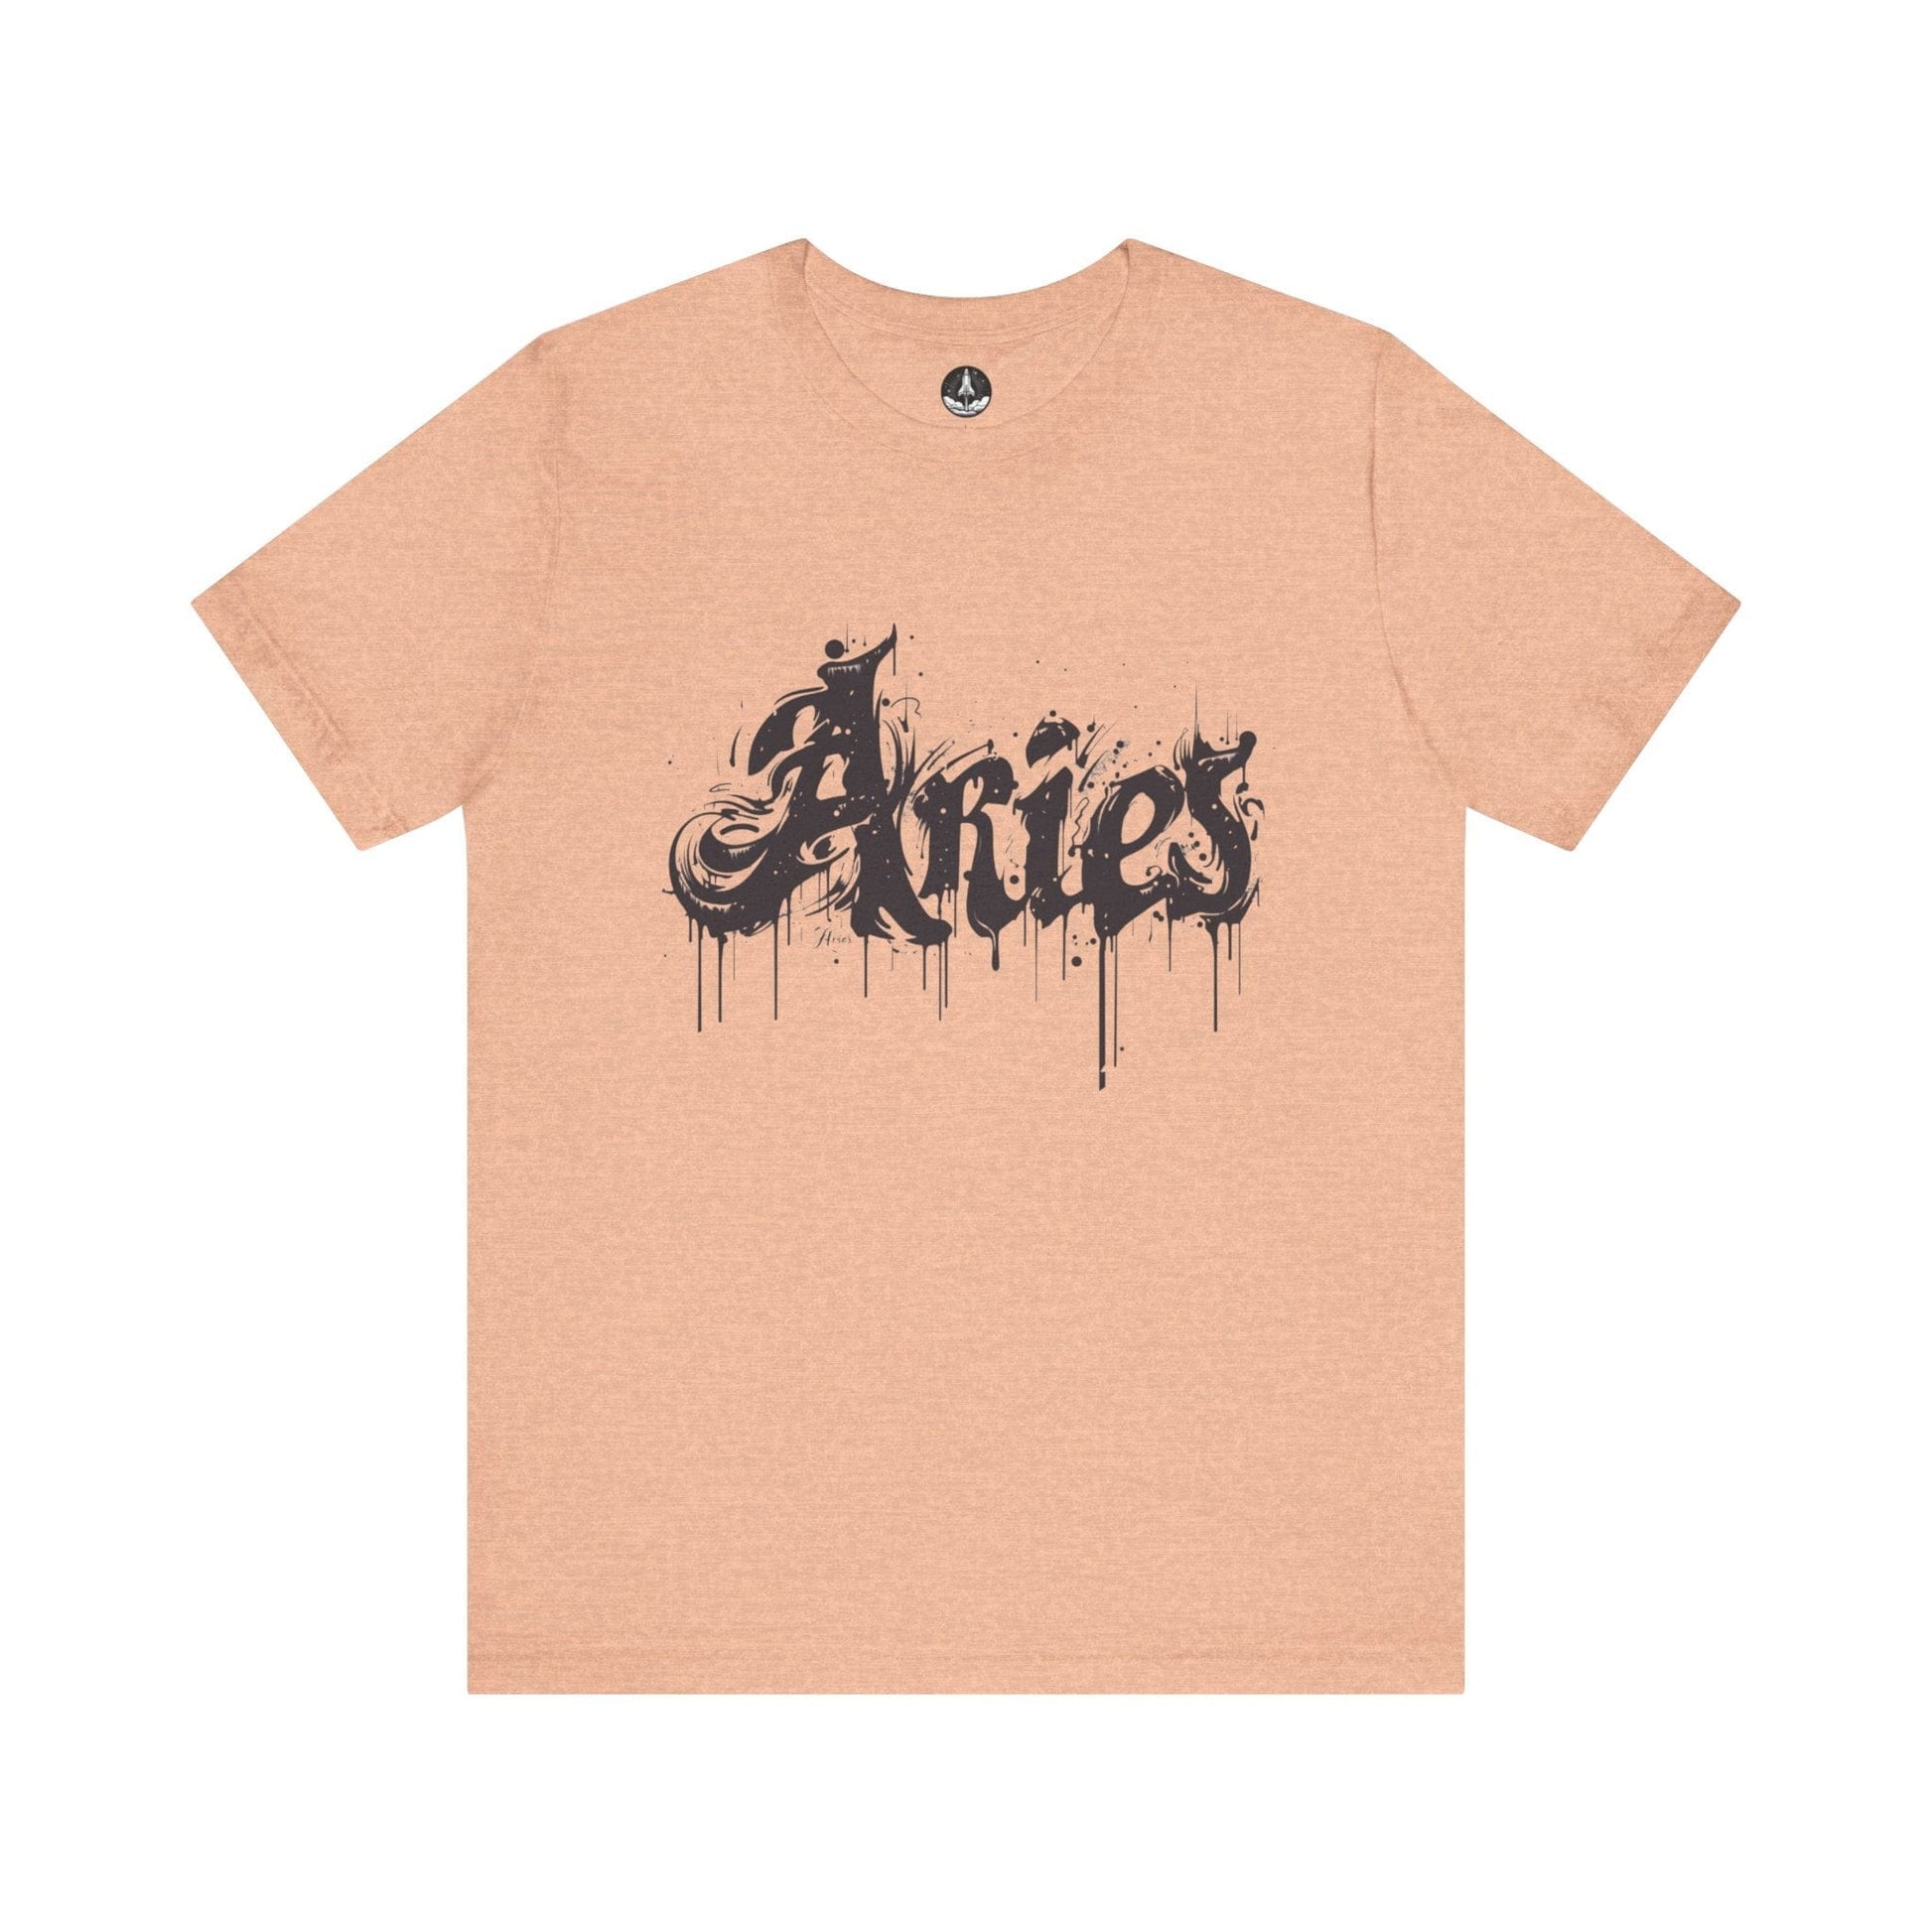 T-Shirt Heather Peach / S Ink-Dripped Aries Energy TShirt – Channel Your Inner Fire